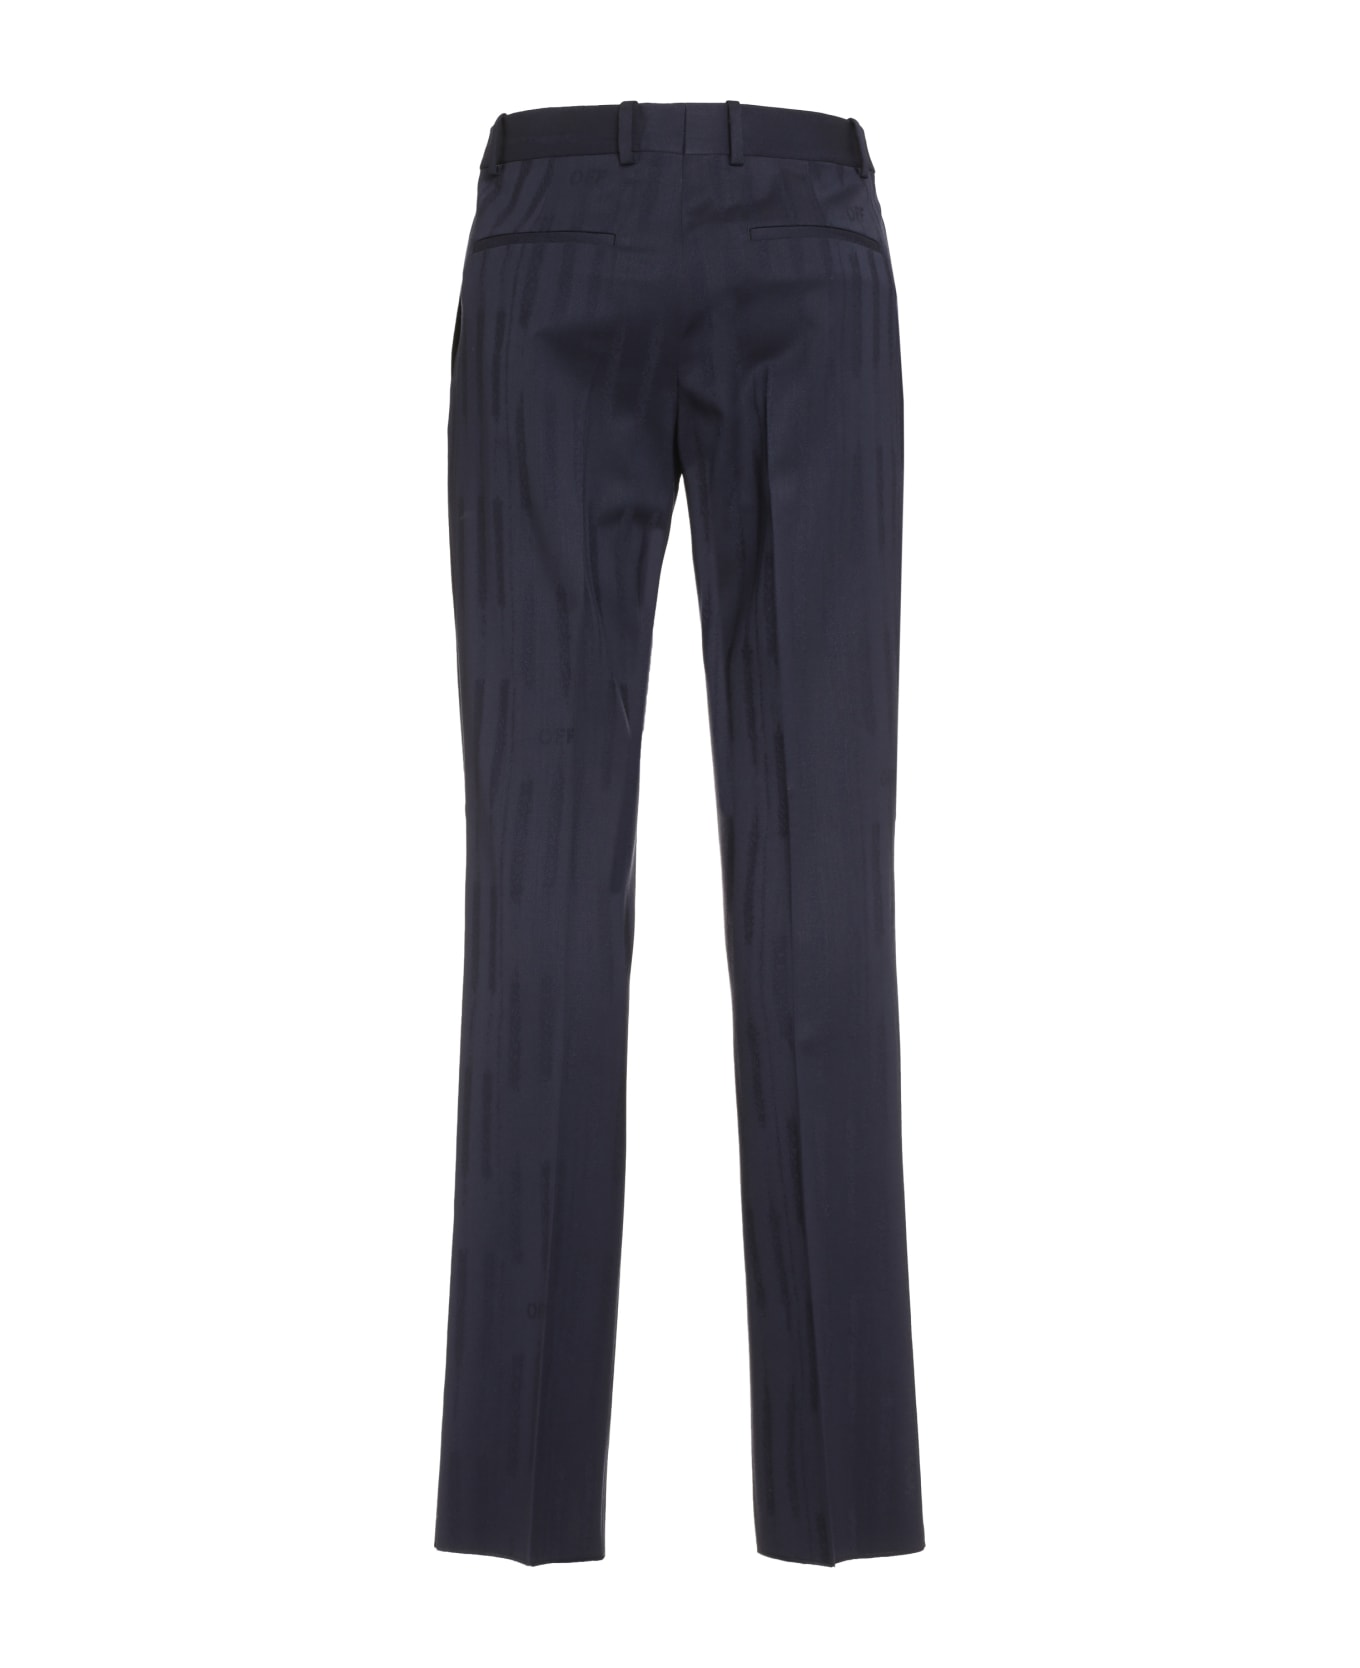 Off-White Slim Fit Tailored Trousers - blue ボトムス